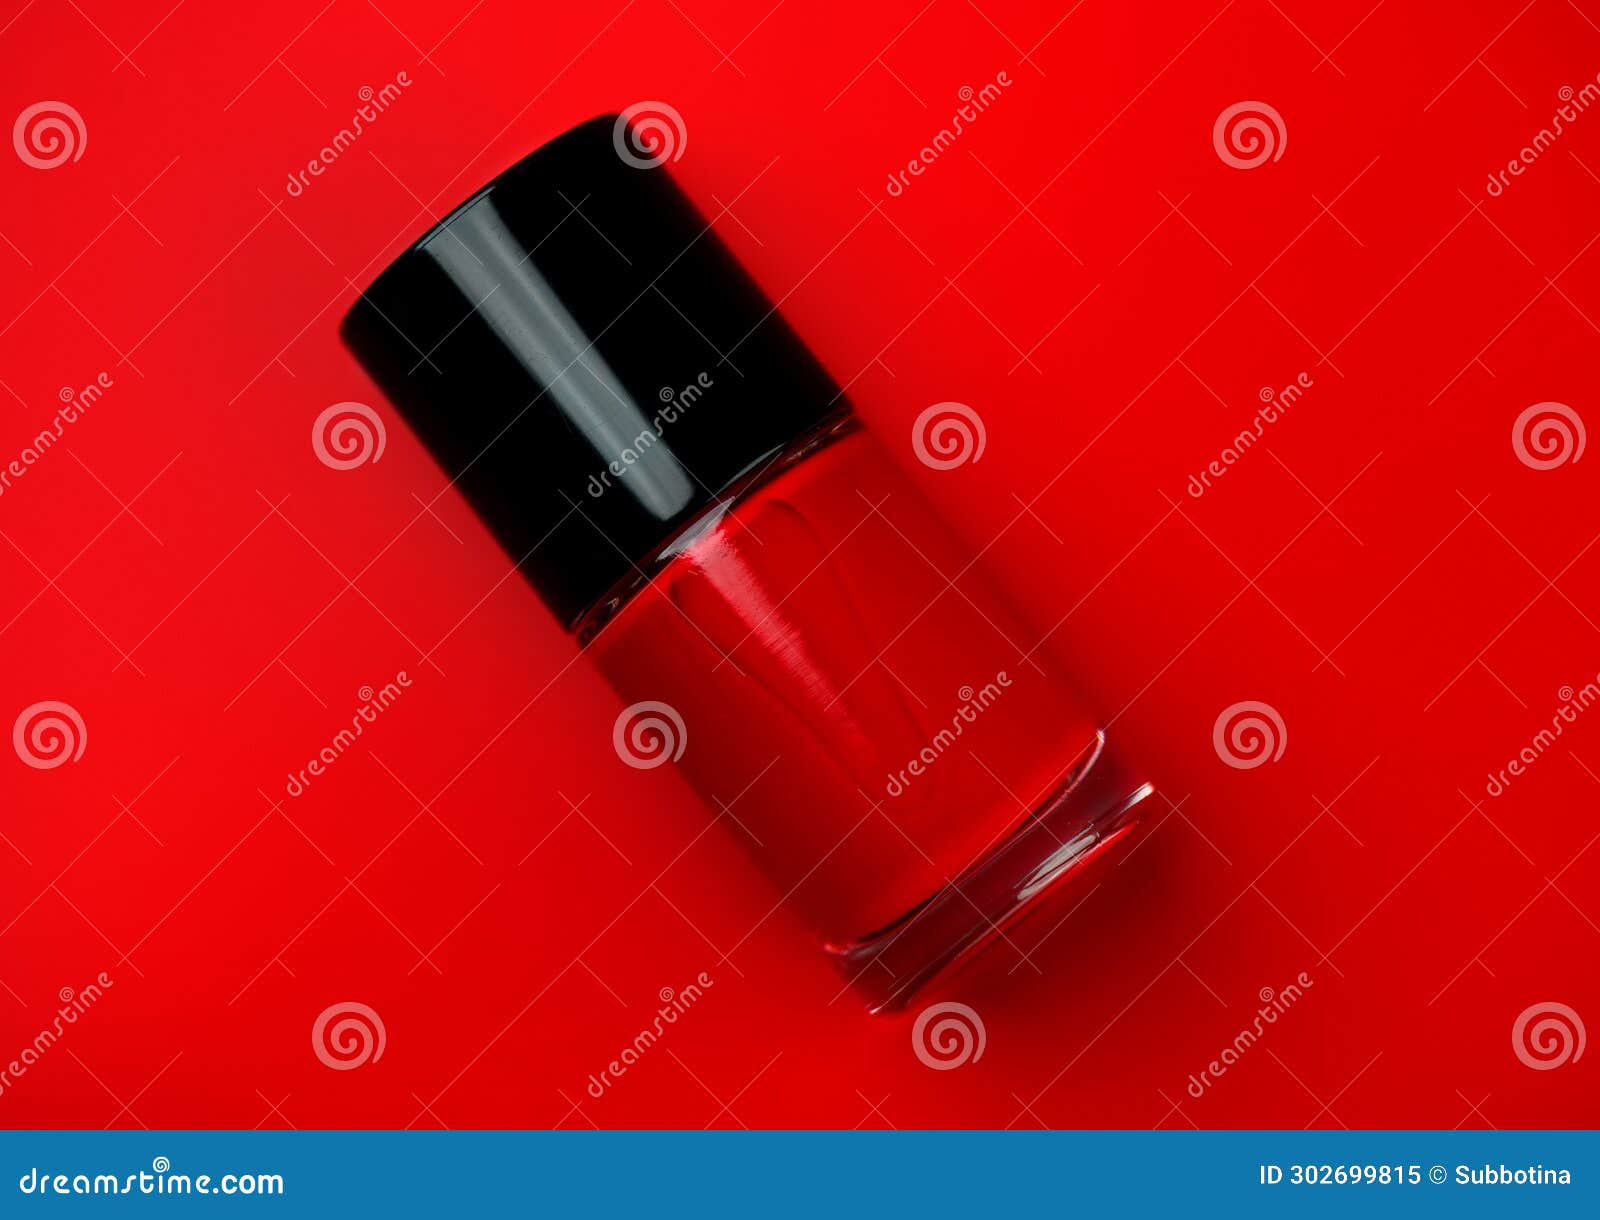 red nail polish bottle over bright red background, top view. gel nailpolish, shellac uv, bottle with brush